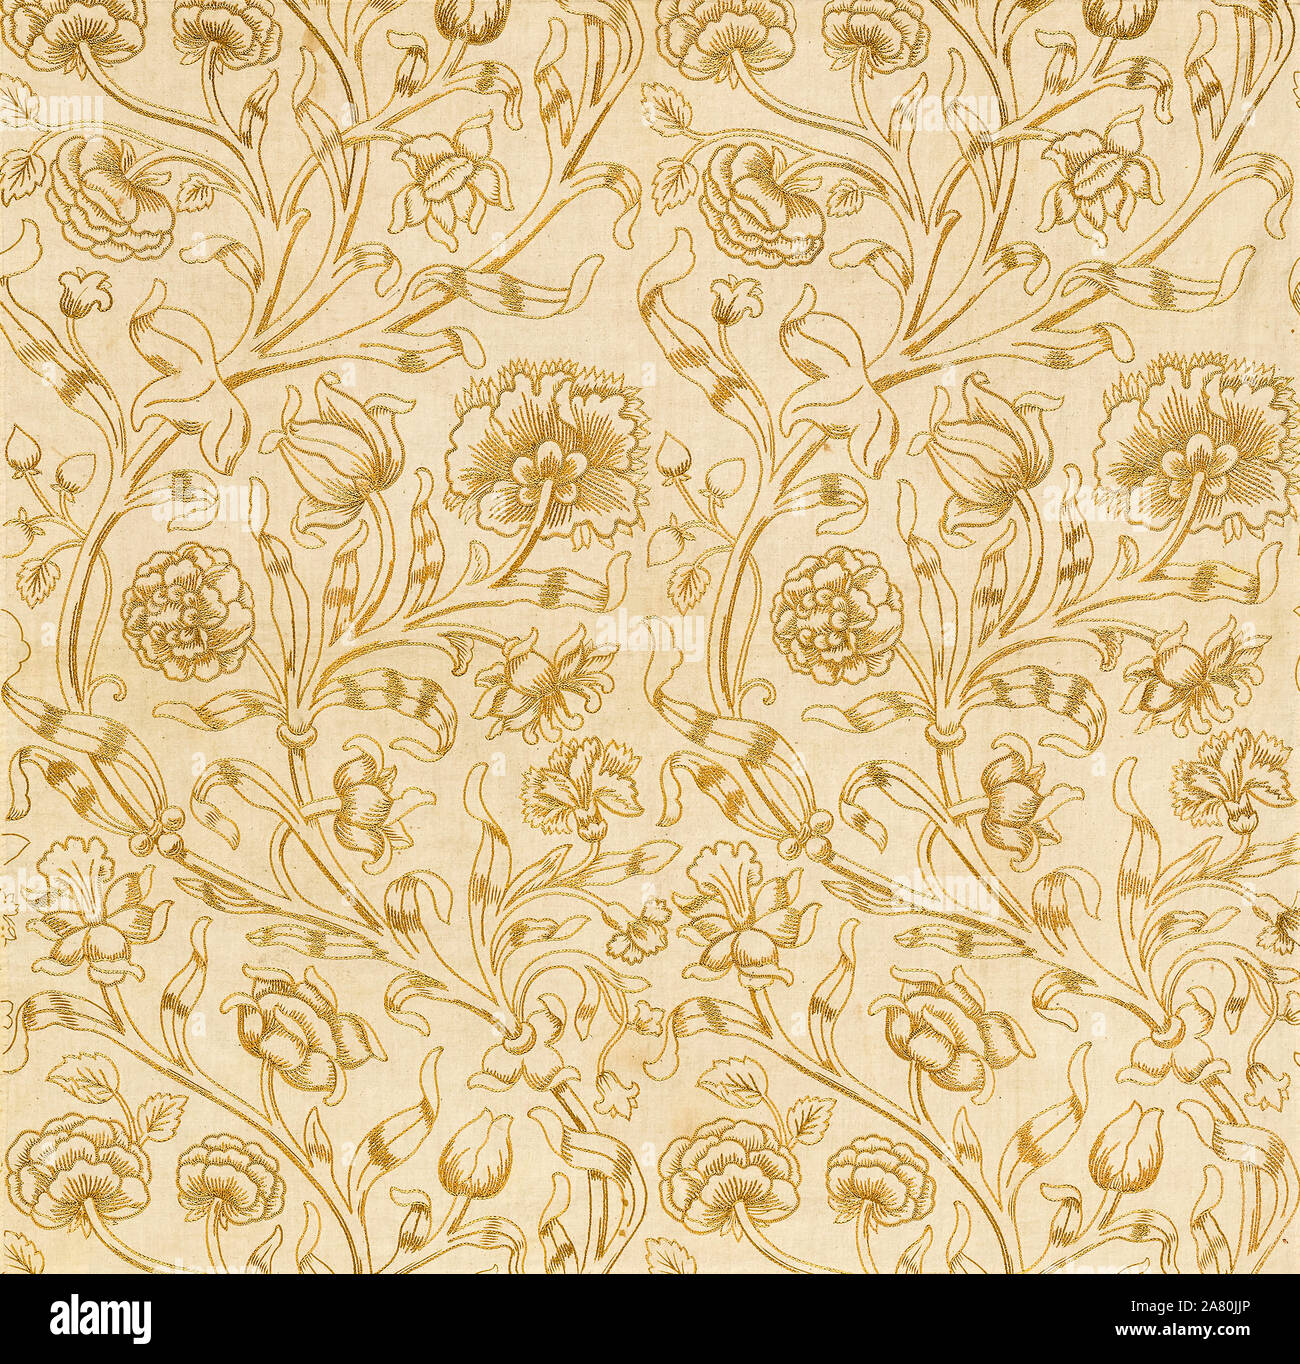 William Morris, Fabric pattern, unnamed Panel, (produced for Liberty fabrics), woodcut print, 1880-1890, Arts and Crafts Movement Stock Photo